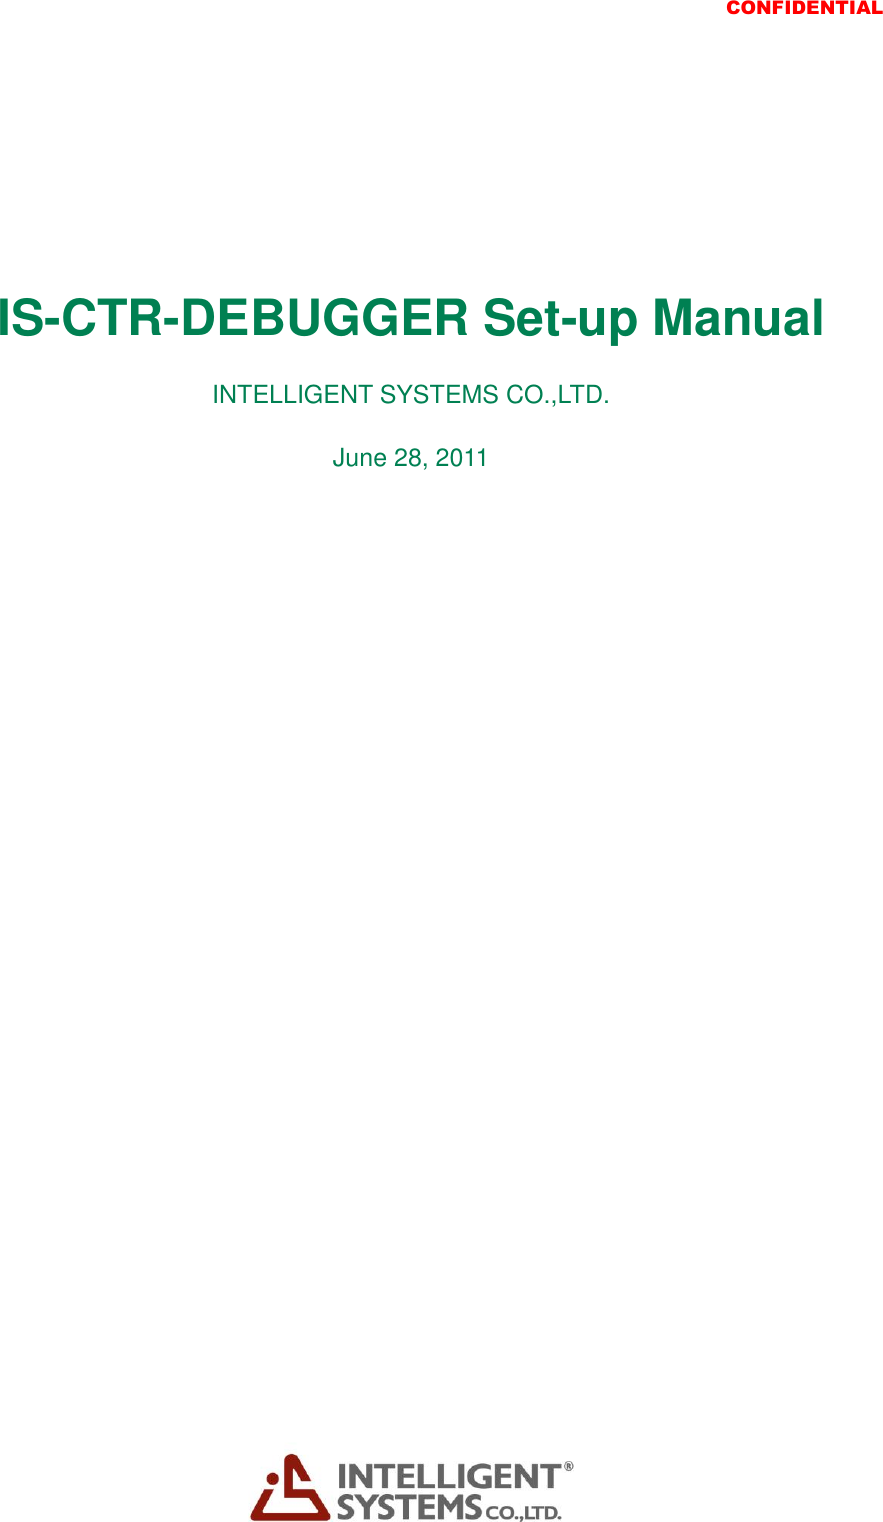  CONFIDENTIAL             IS-CTR-DEBUGGER Set-up Manual INTELLIGENT SYSTEMS CO.,LTD. June 28, 2011        